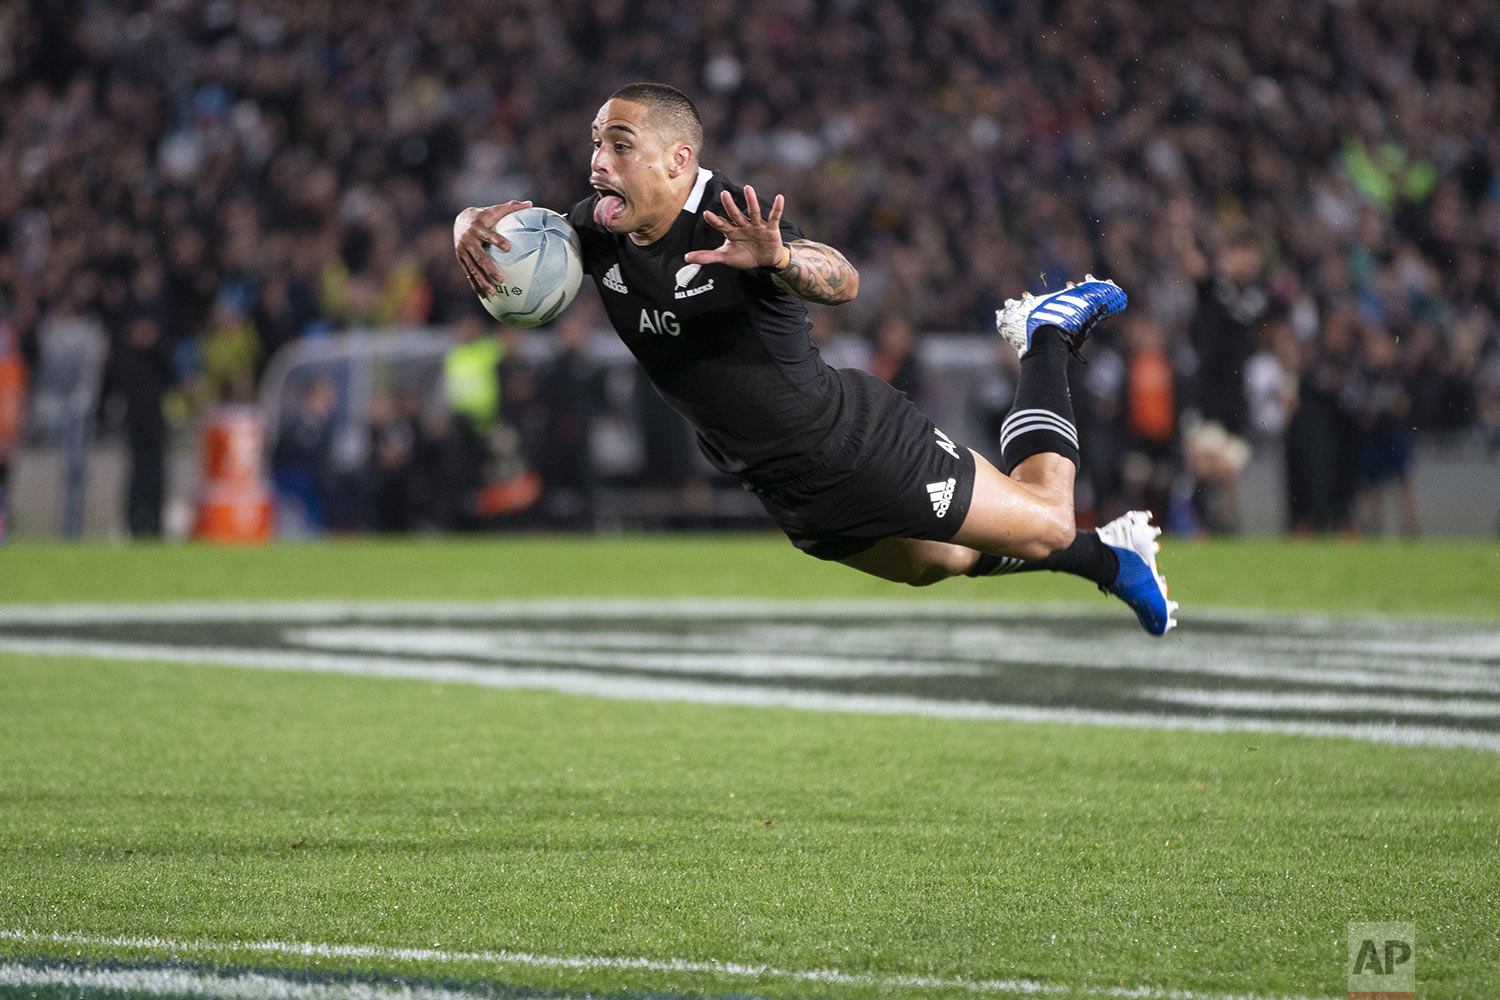  All Blacks halfback Aaron Smith dives over to score against Australia during their Bledisloe Cup rugby test match at Eden Park in Auckland, New Zealand, Saturday, Aug. 17, 2019. (Brett Phibbs/SNPA via AP) 